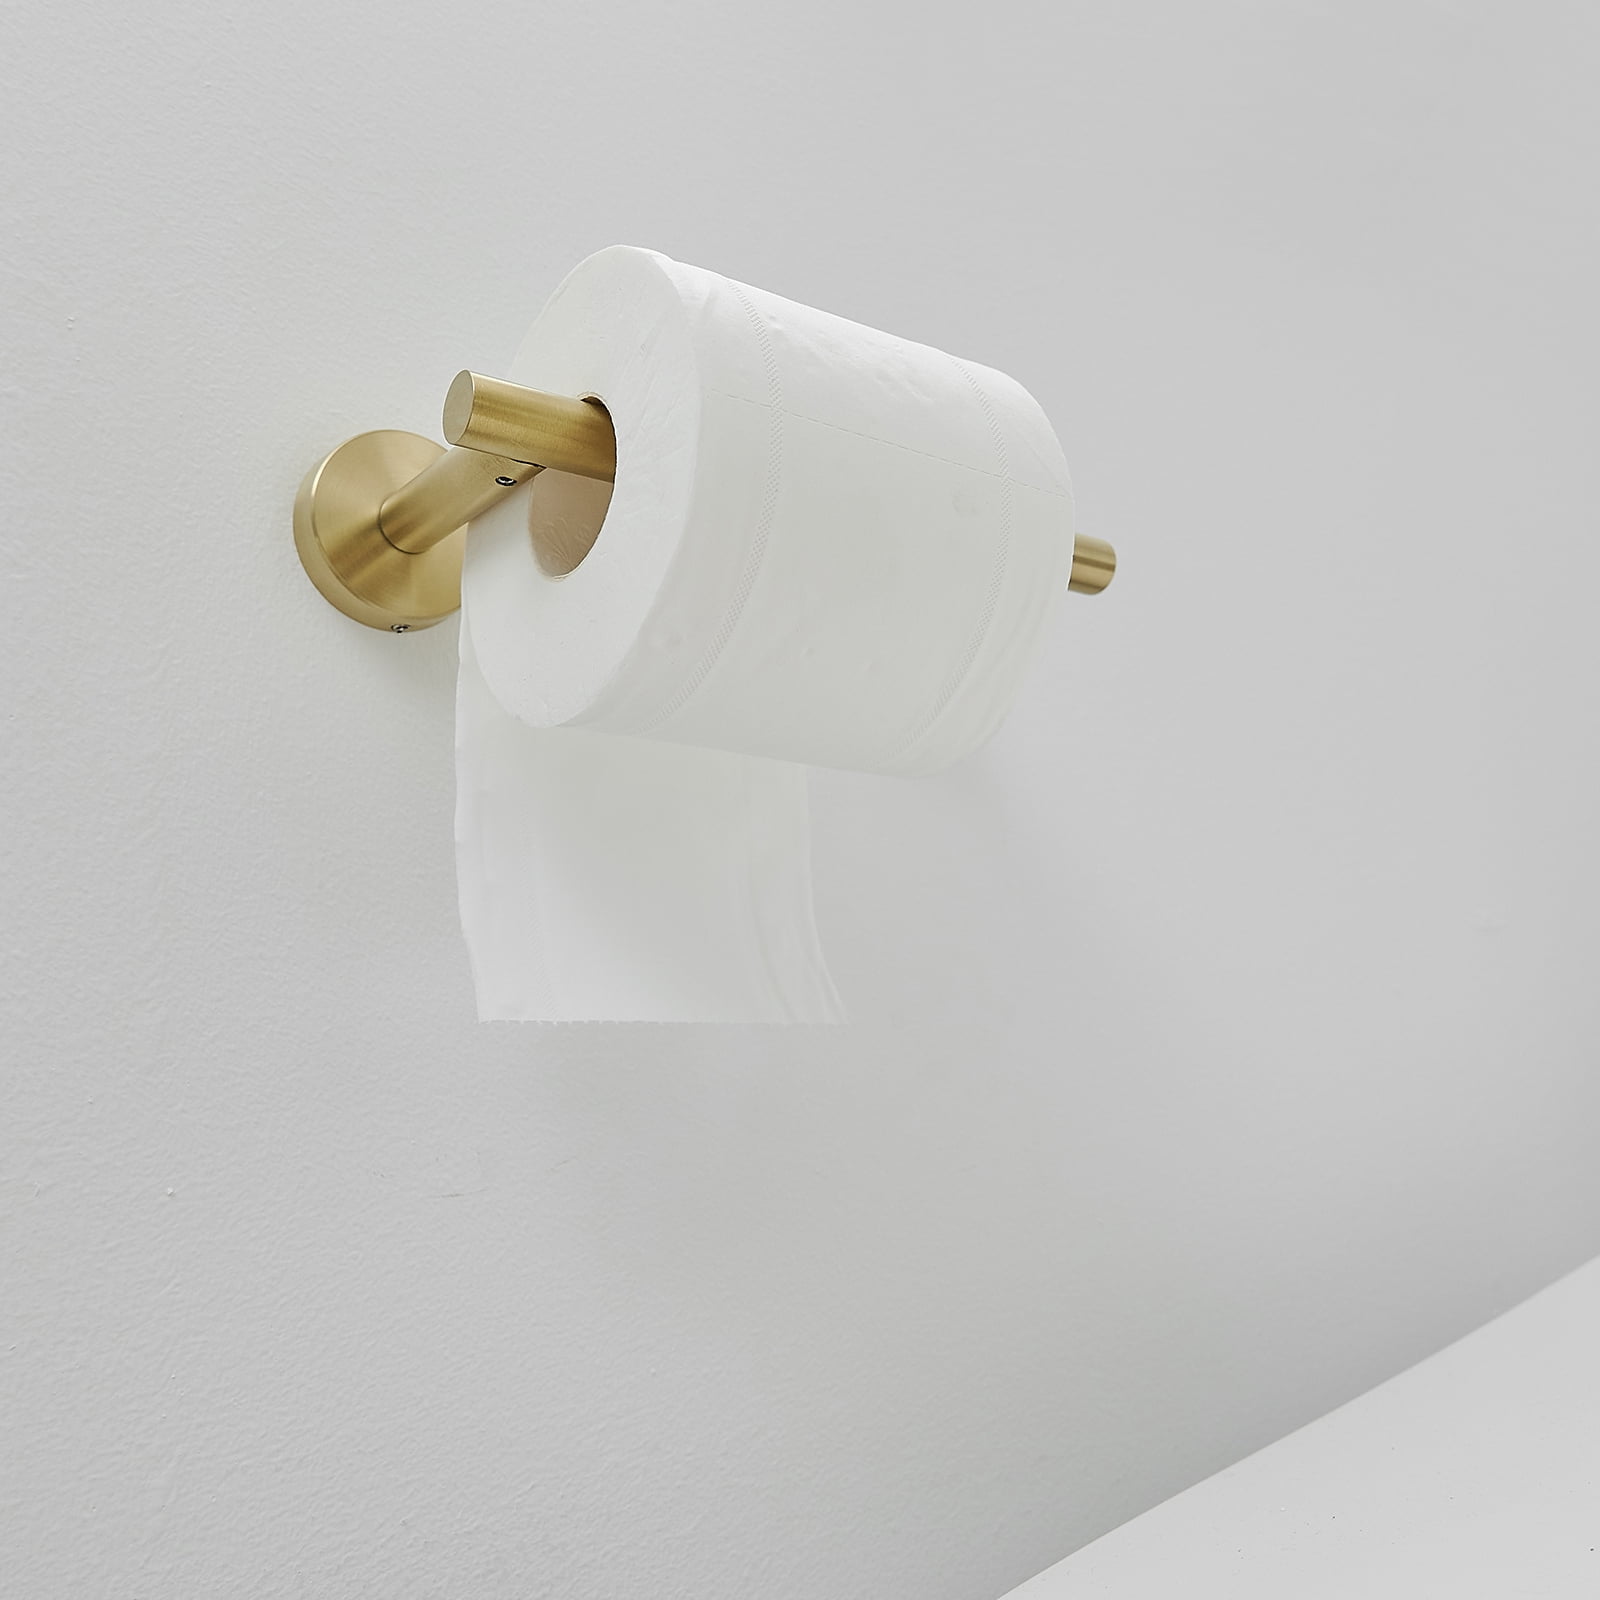 BWE Double Post Pivoting Wall Mounted Towel Bar Toilet Paper Holder in Brushed Gold